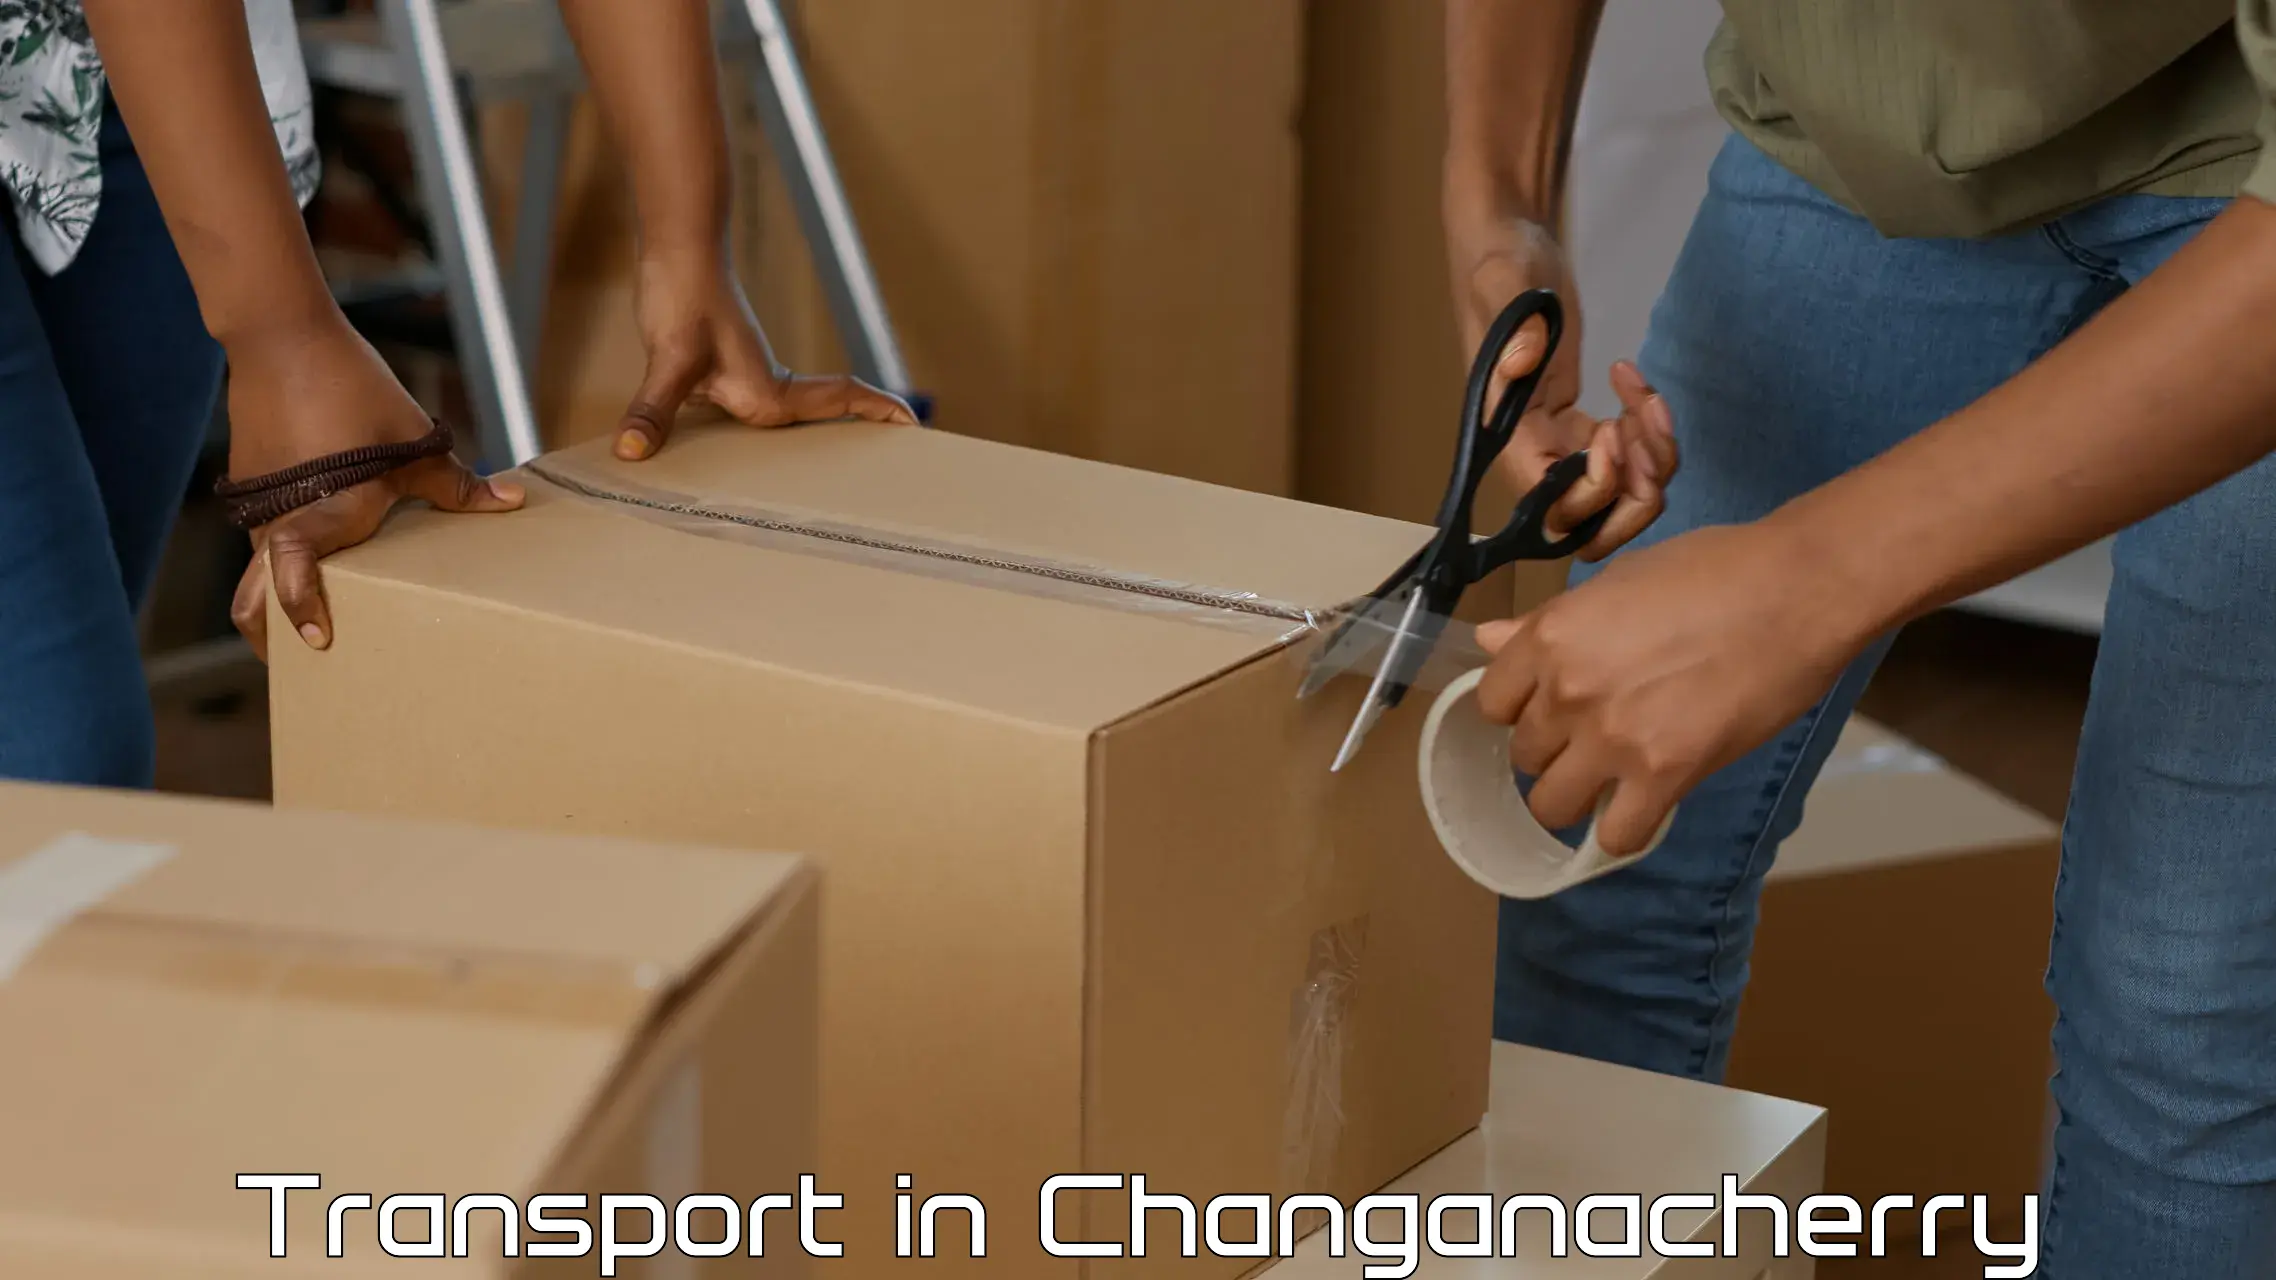 Parcel transport services in Changanacherry